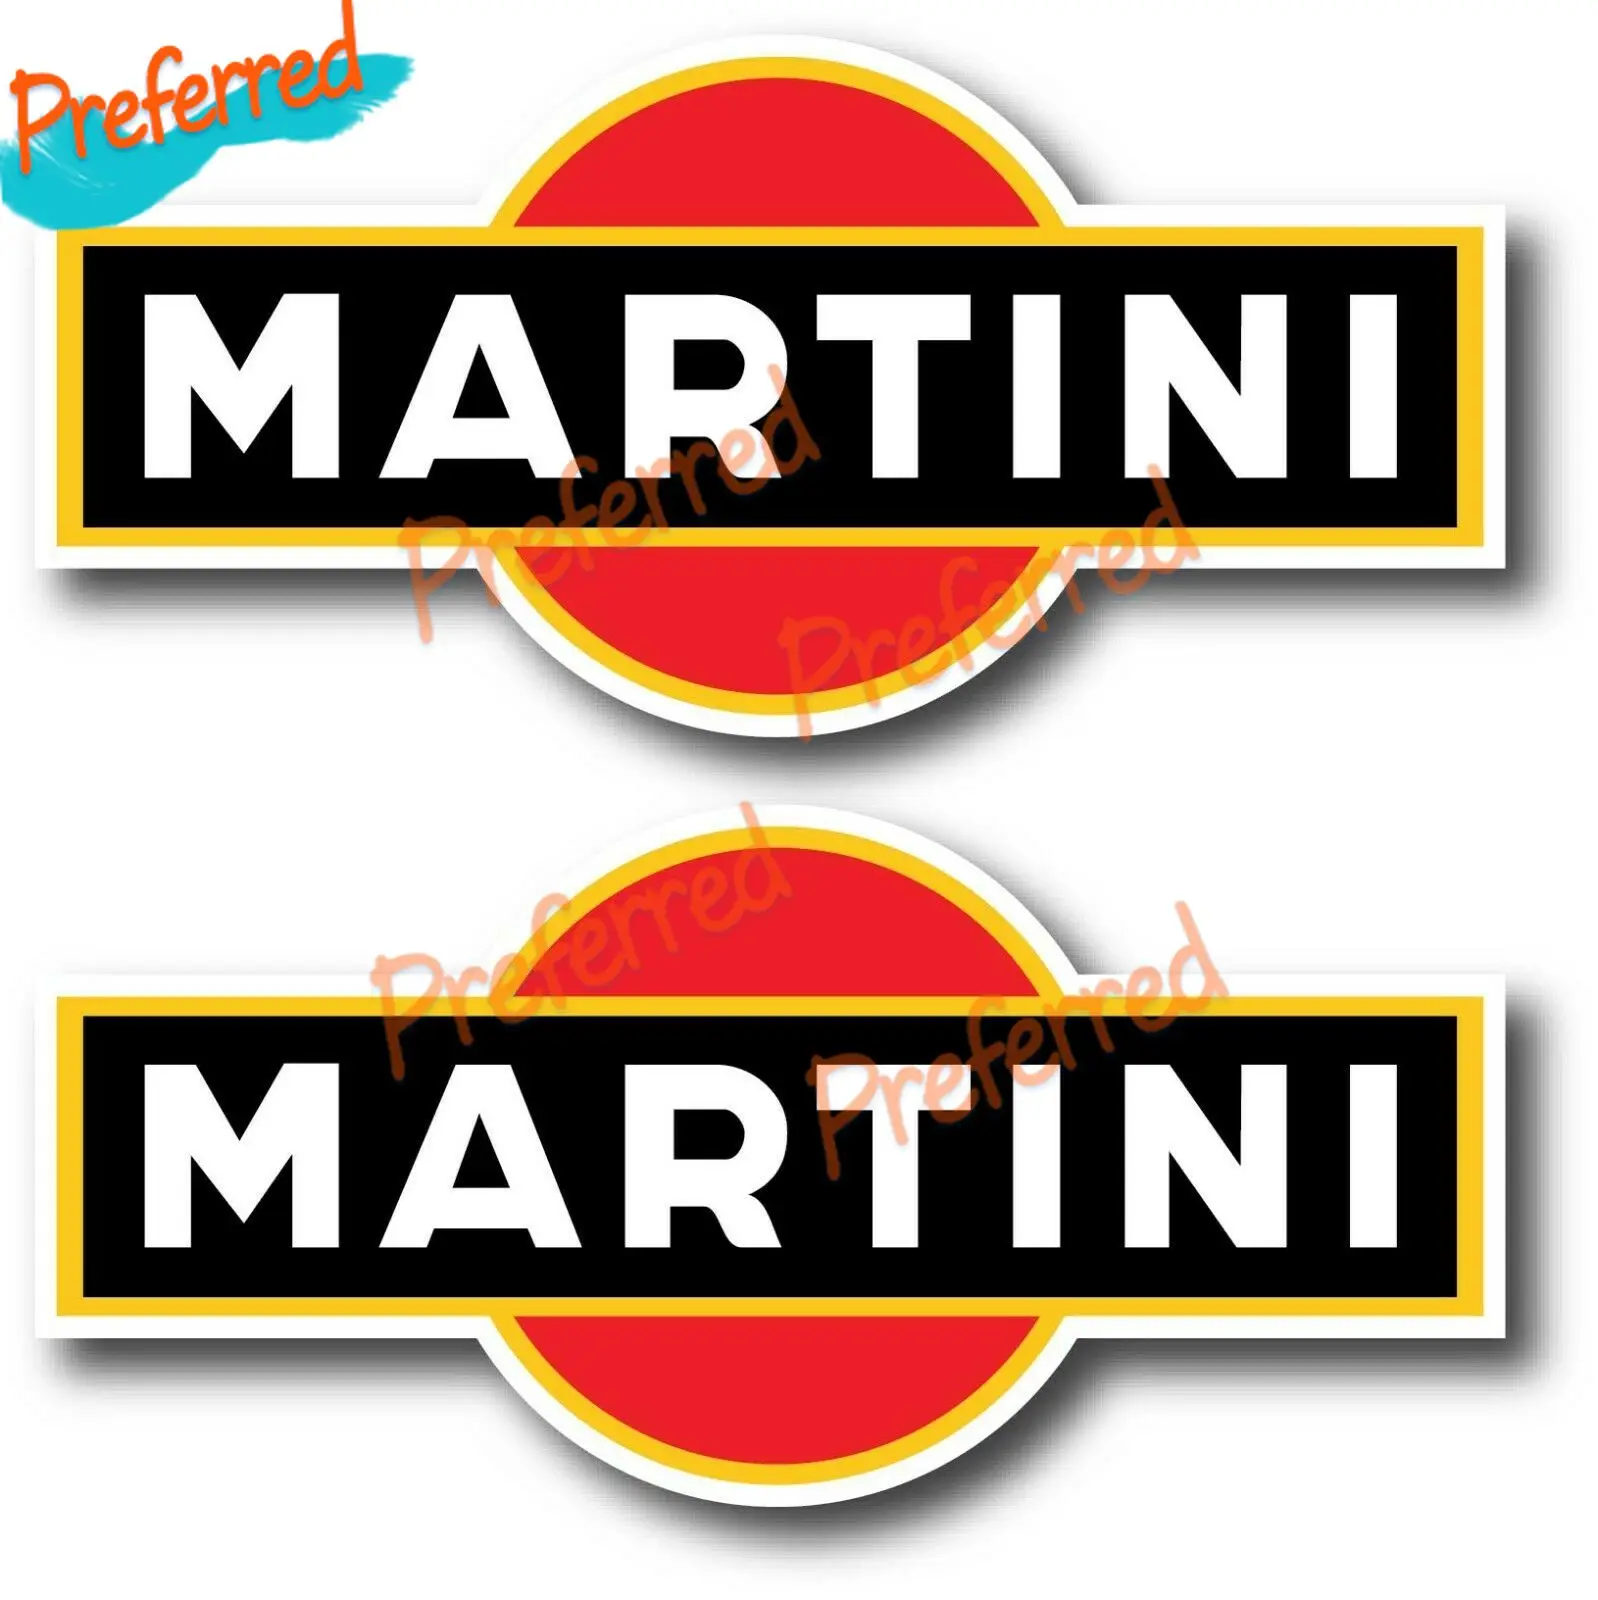 

2x Martini Decal Sticker Truck Car Vehicle Wall Racing Motorsport for Your Home, Car, Coolers, and Laptops Boutique Decals